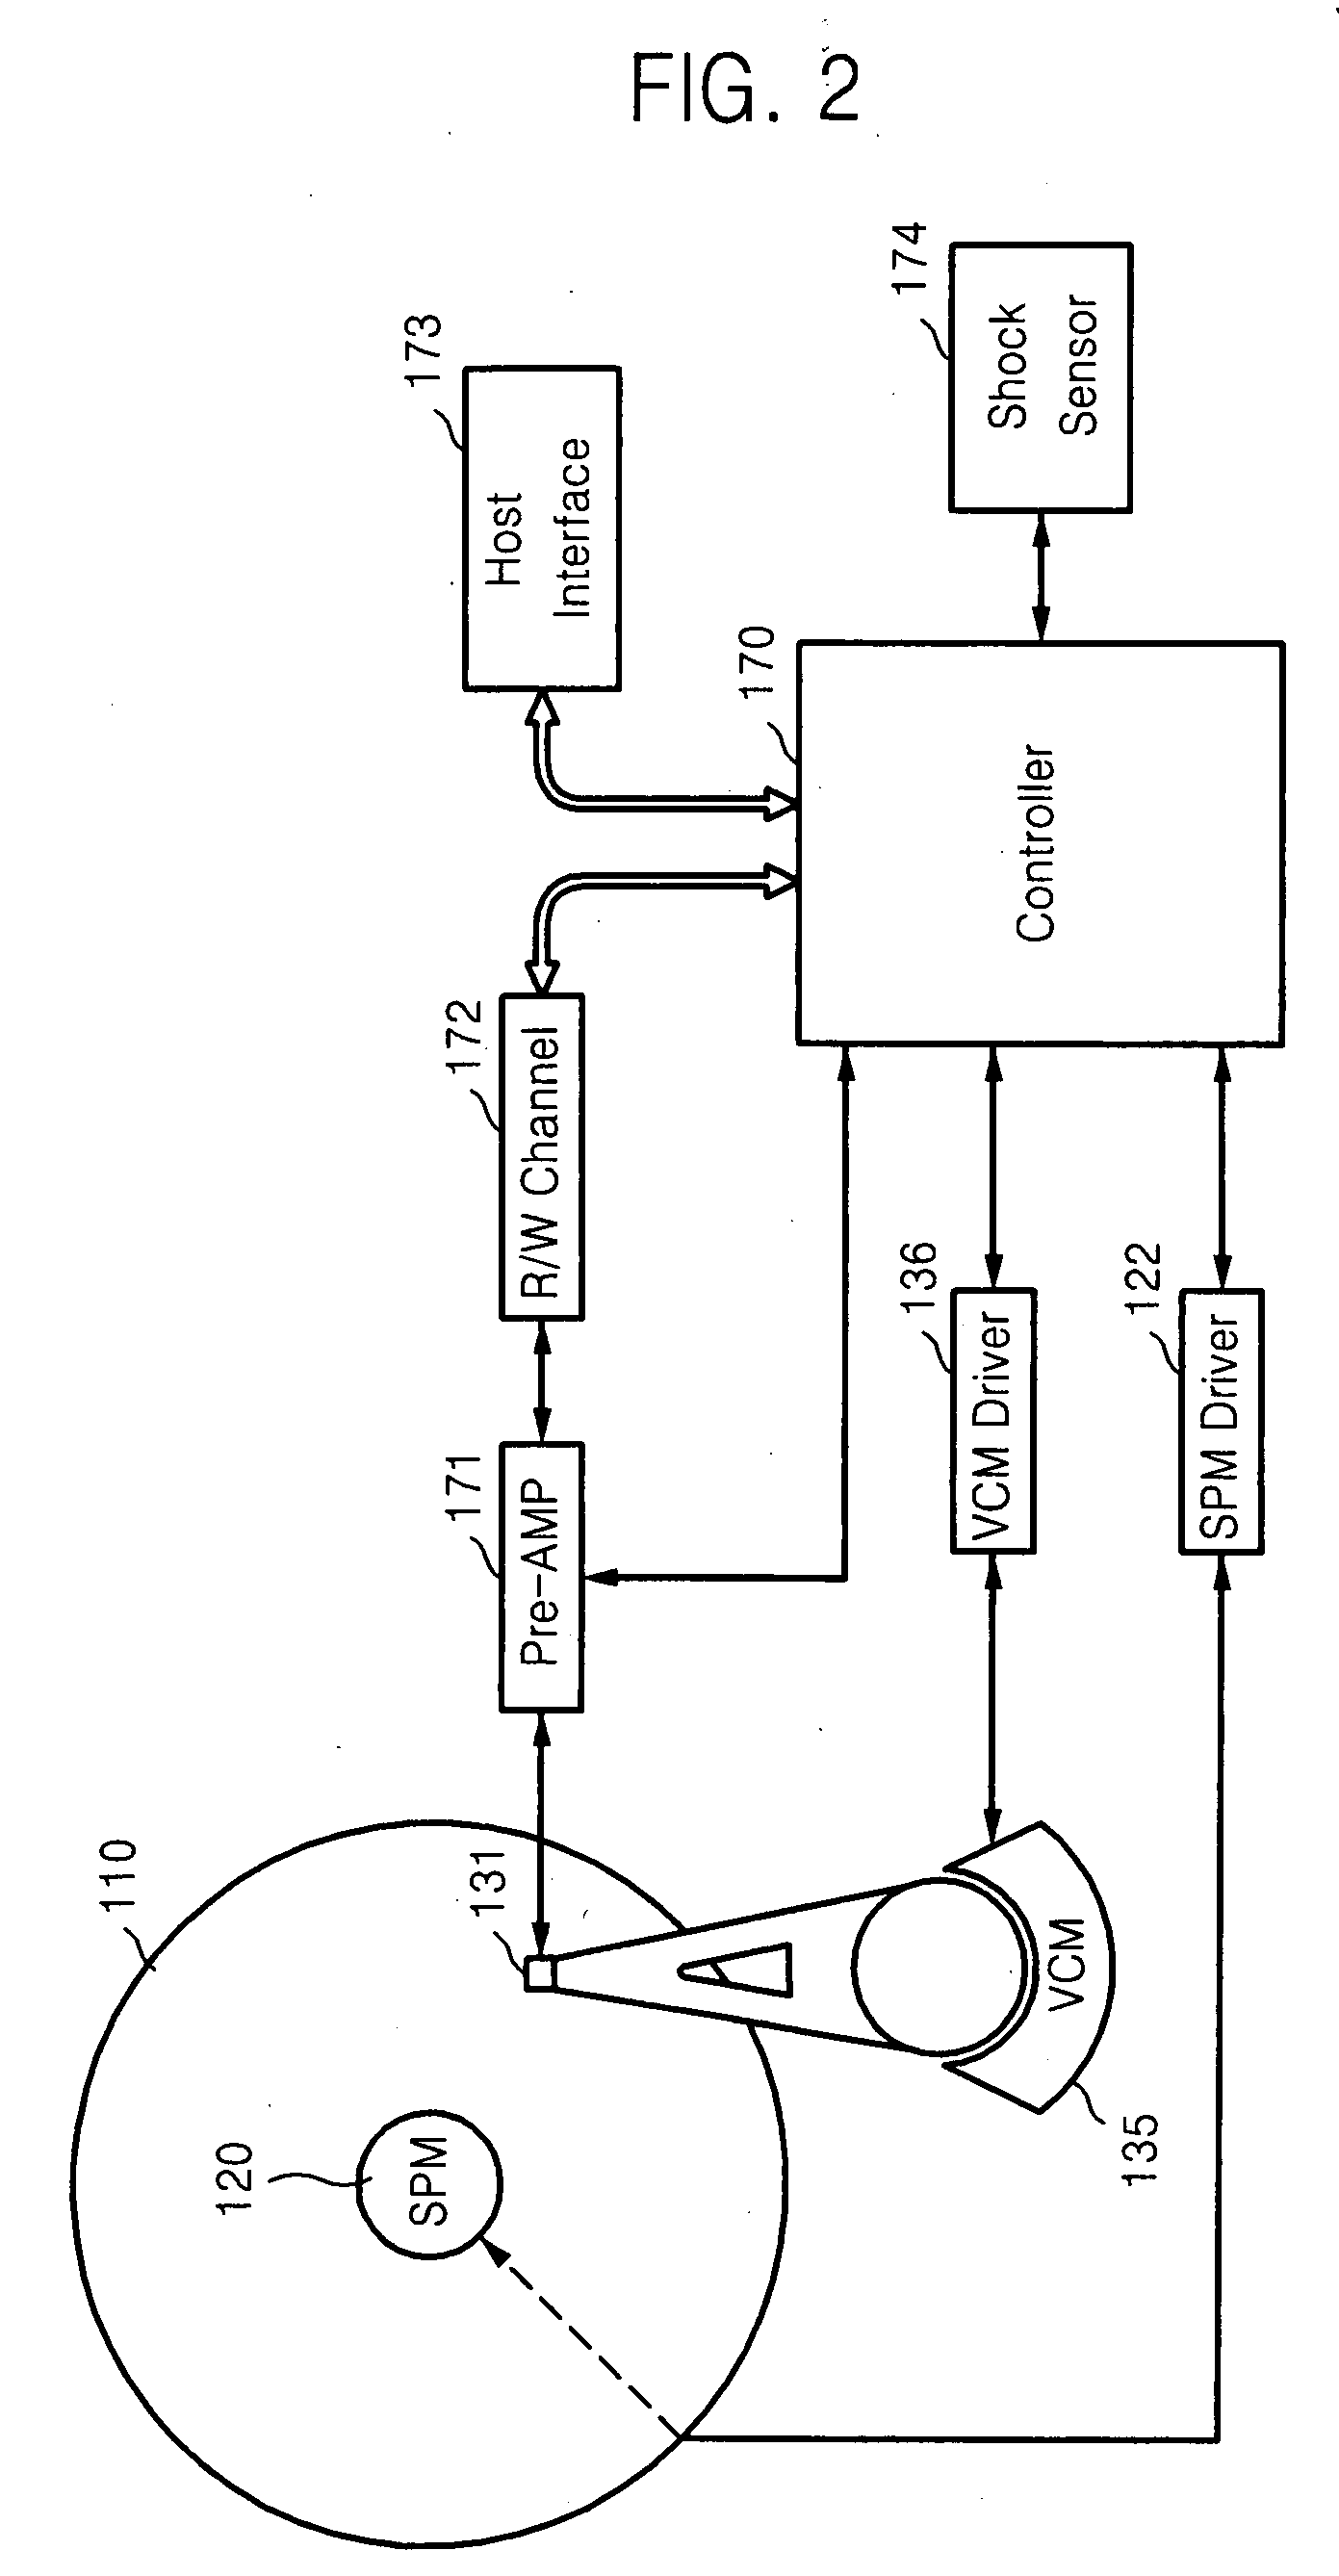 Hard disk drive, method for controlling FOD voltage thereof, and computer readable recording medium recording the method